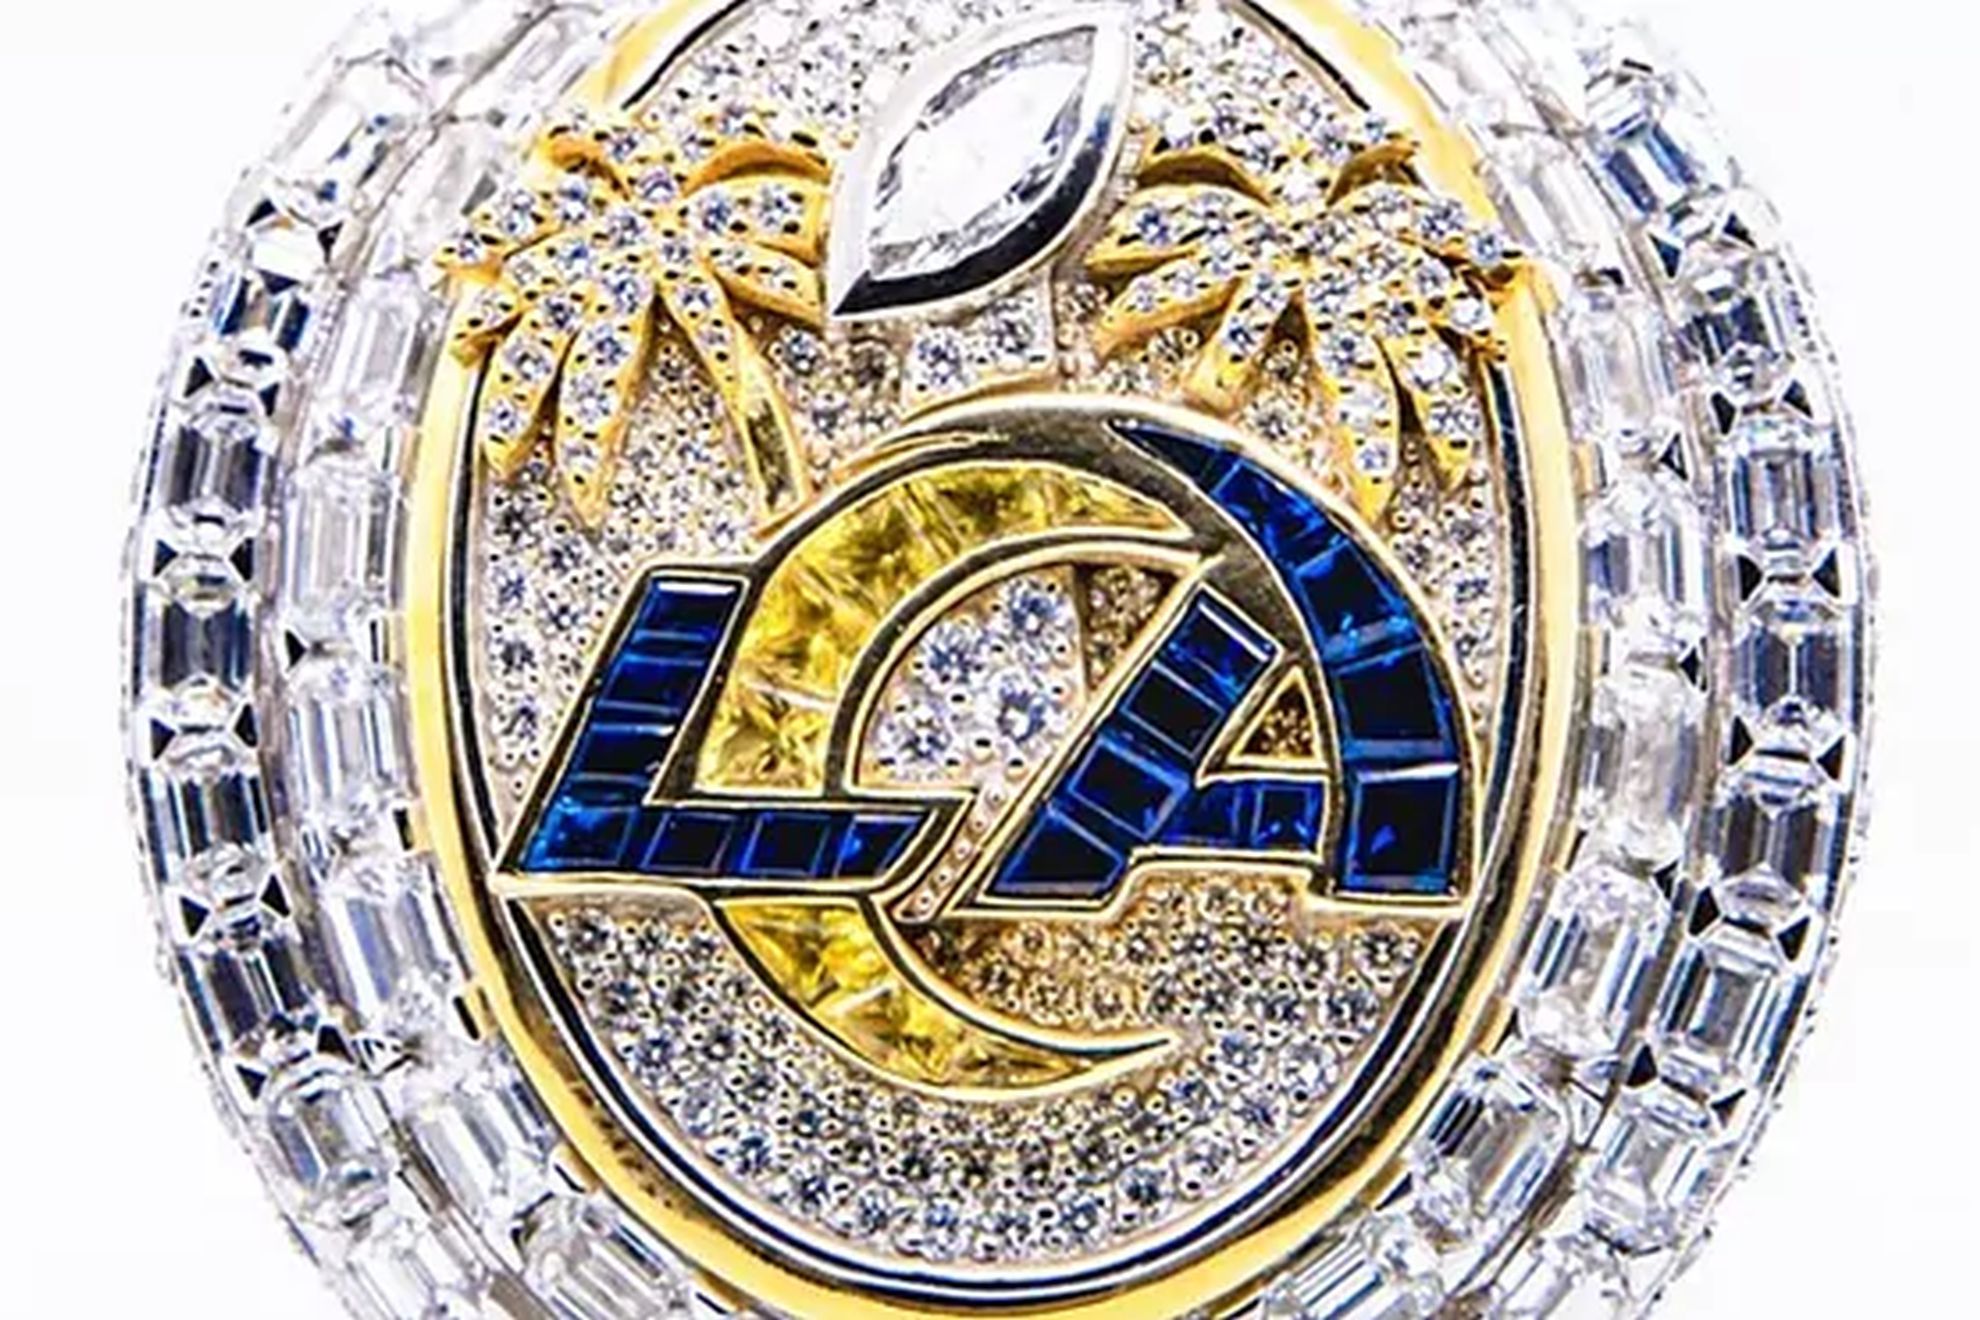 Conference Championships: Do NFL Teams get rings for conference